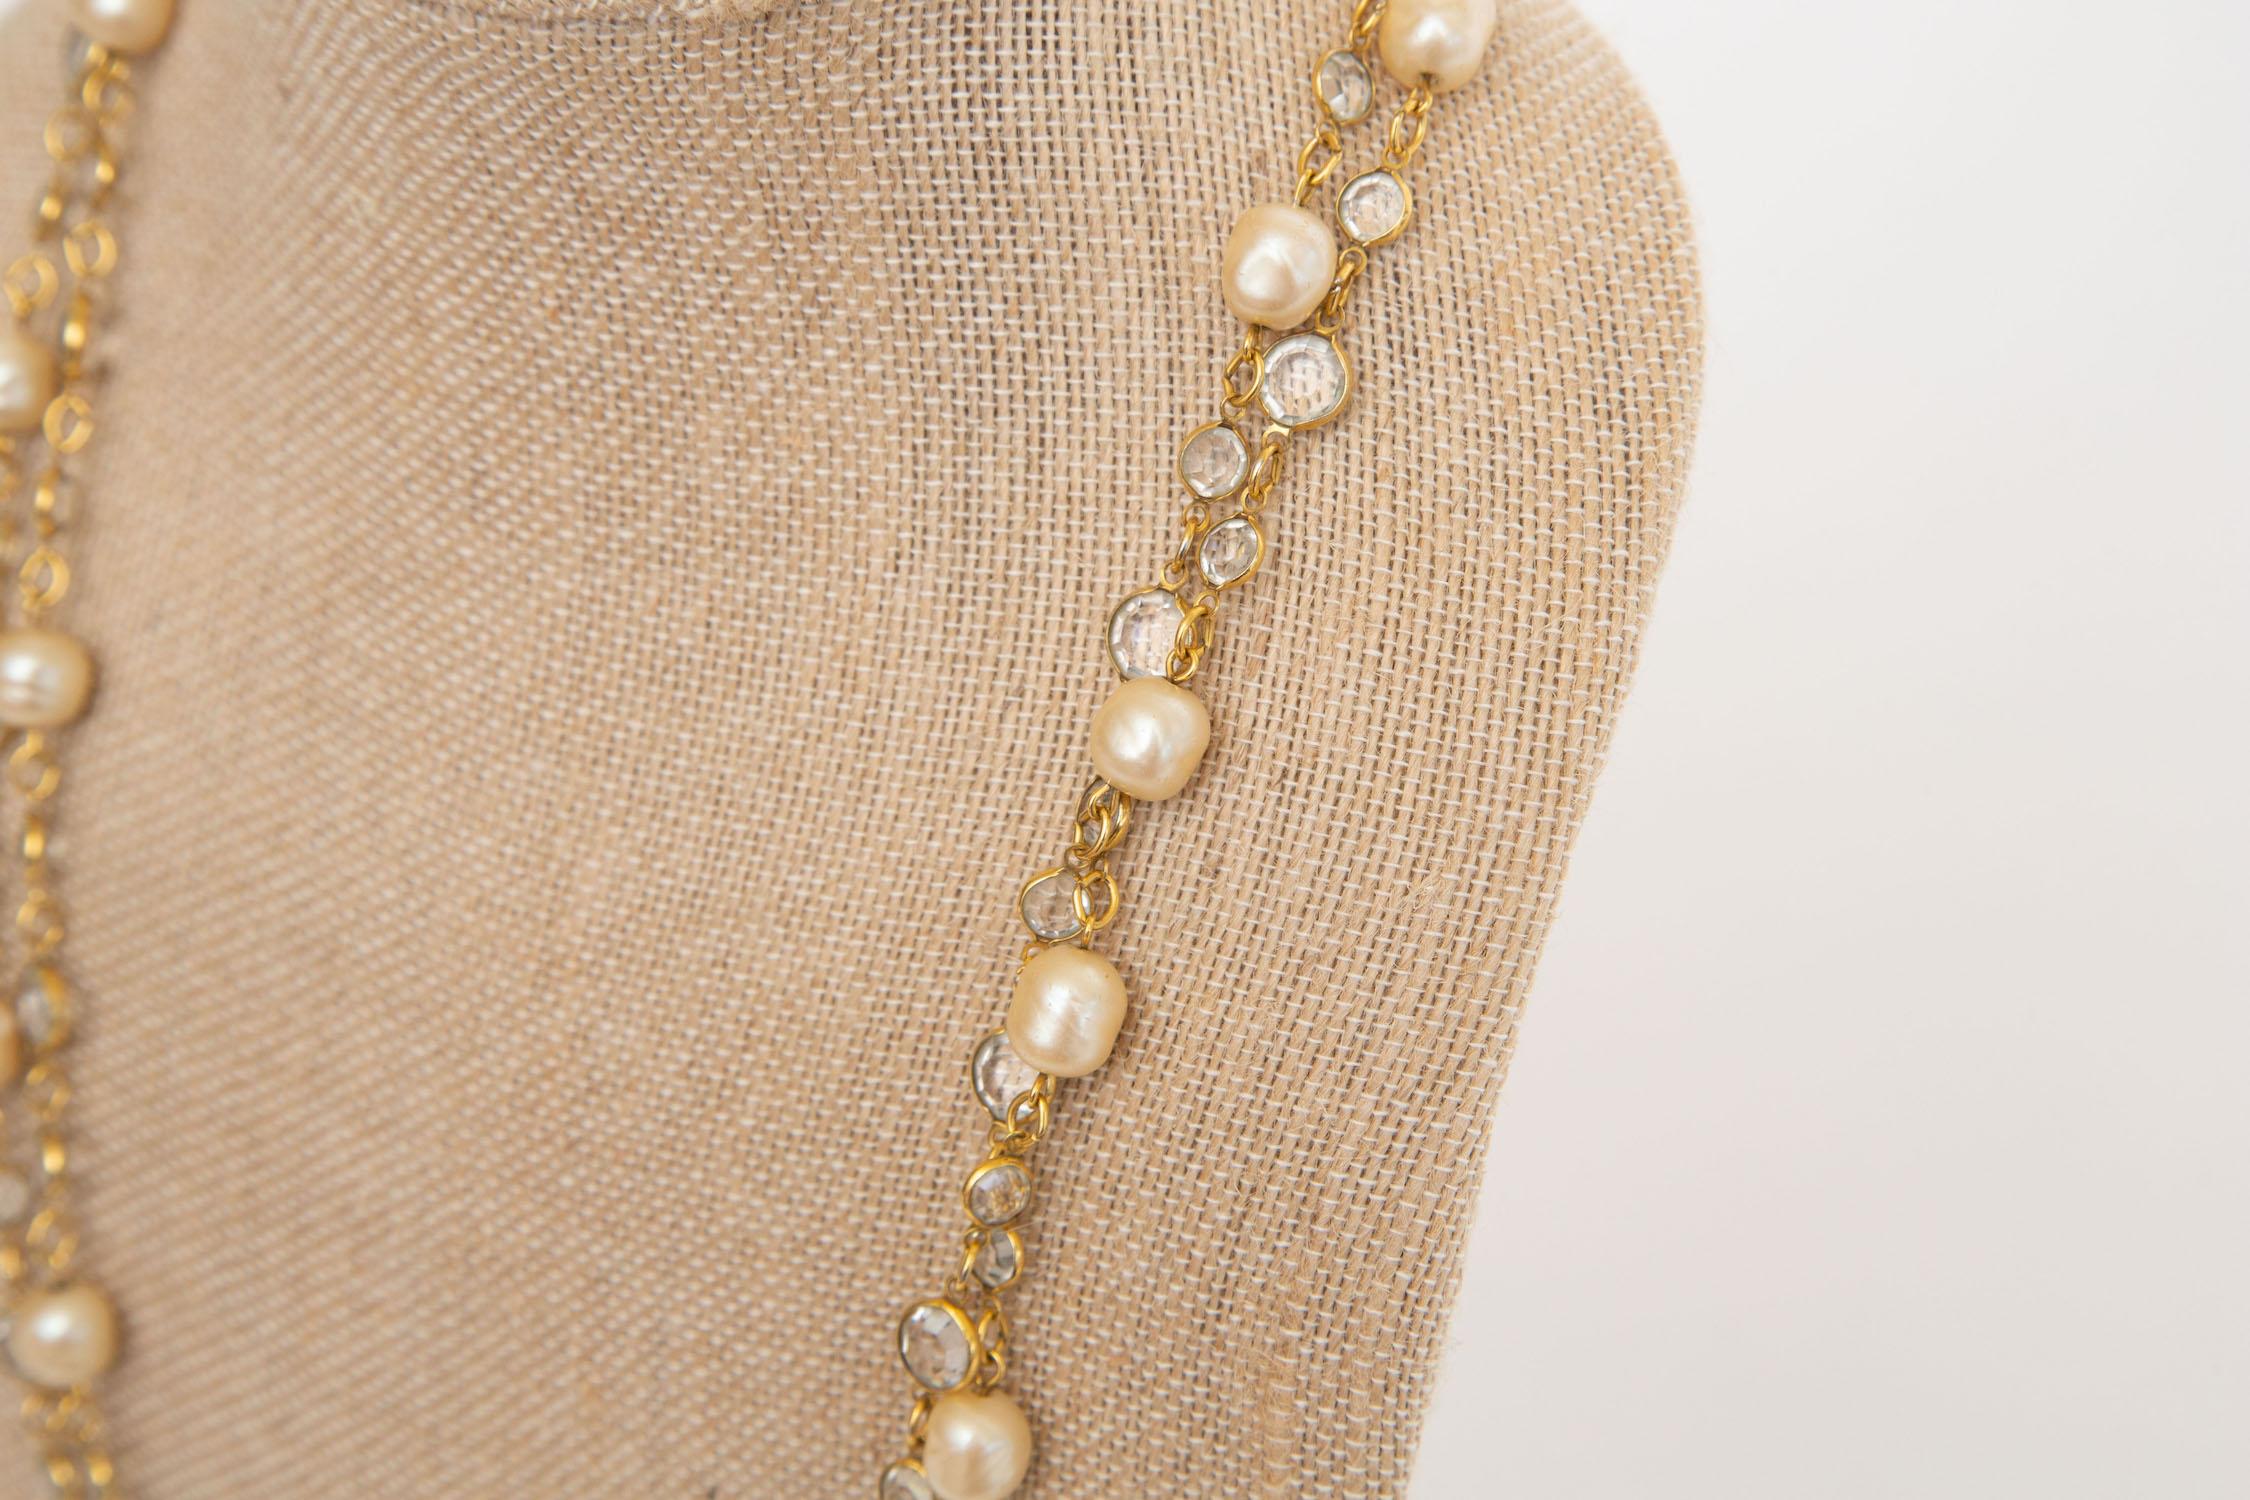 Women's Chanel Vintage Clear Beveled Crystal and Faux Pearl Sautoir Link Necklace  For Sale